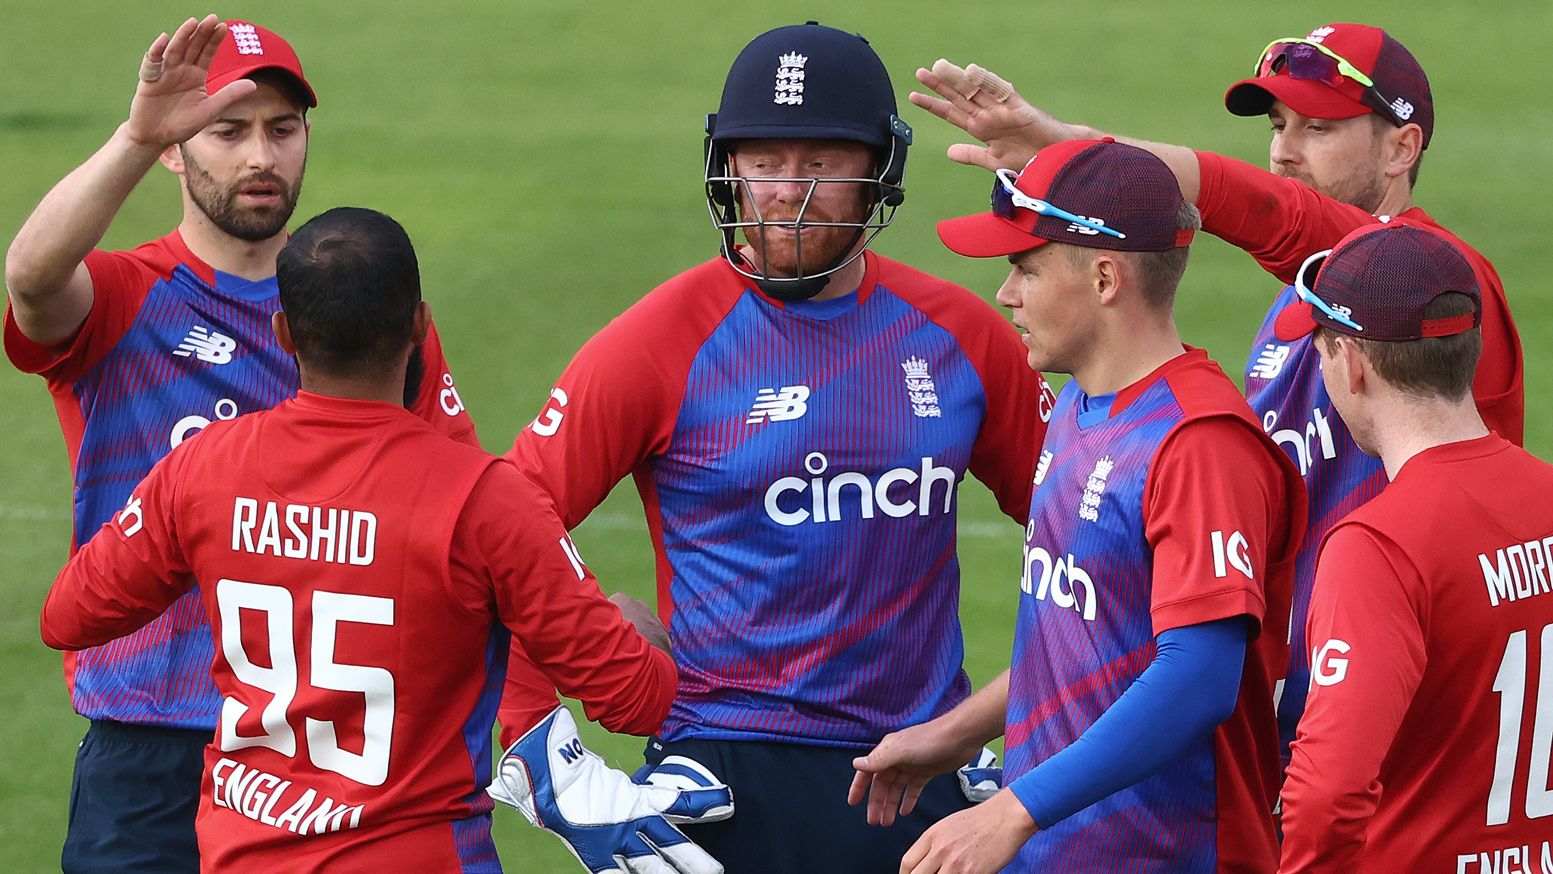 Sri Lanka's batting woes continue as England take unassailable 2-0 lead in the series 